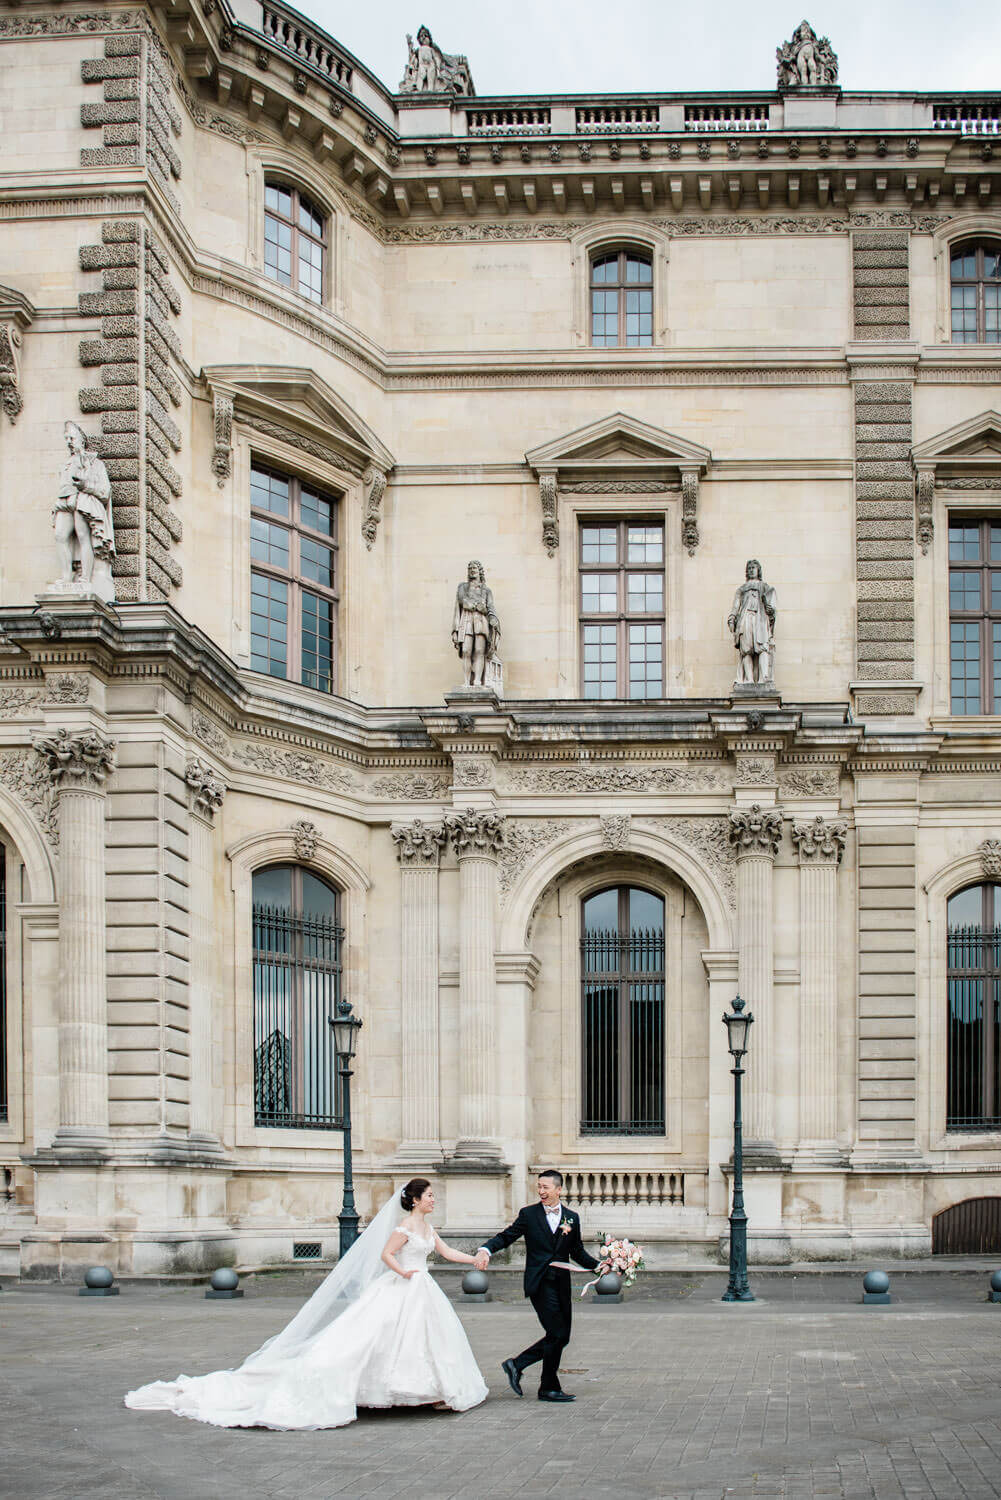 Elopement in Paris photography - a bride and groom run in the streets of Paris